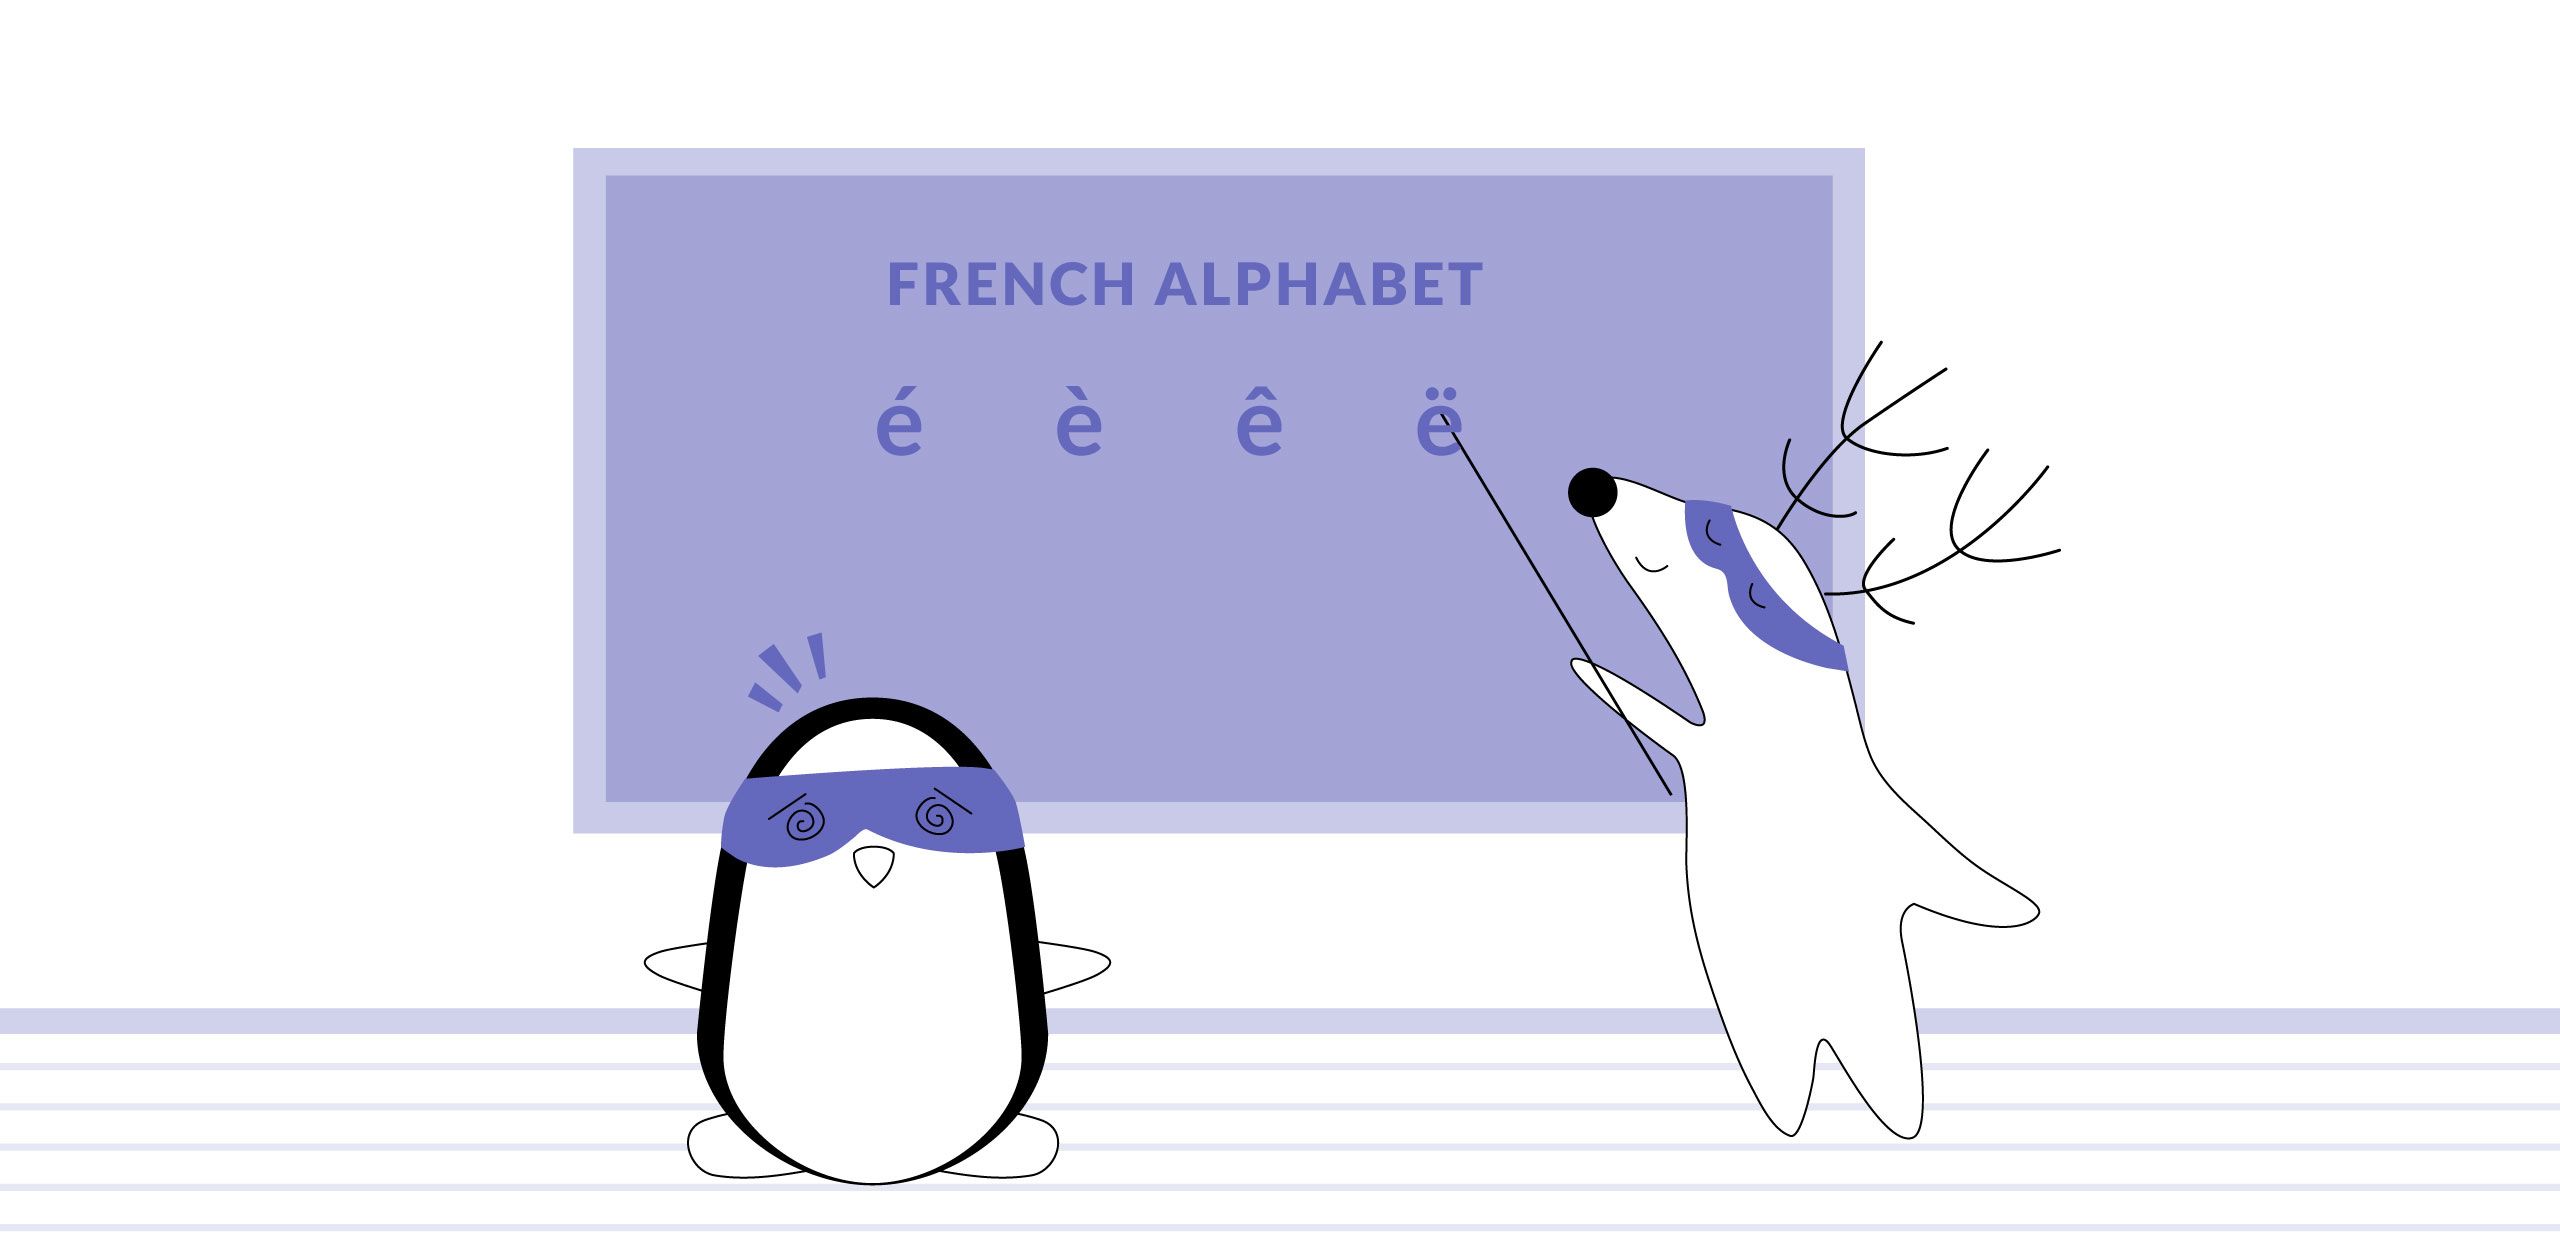 Accent marks in French